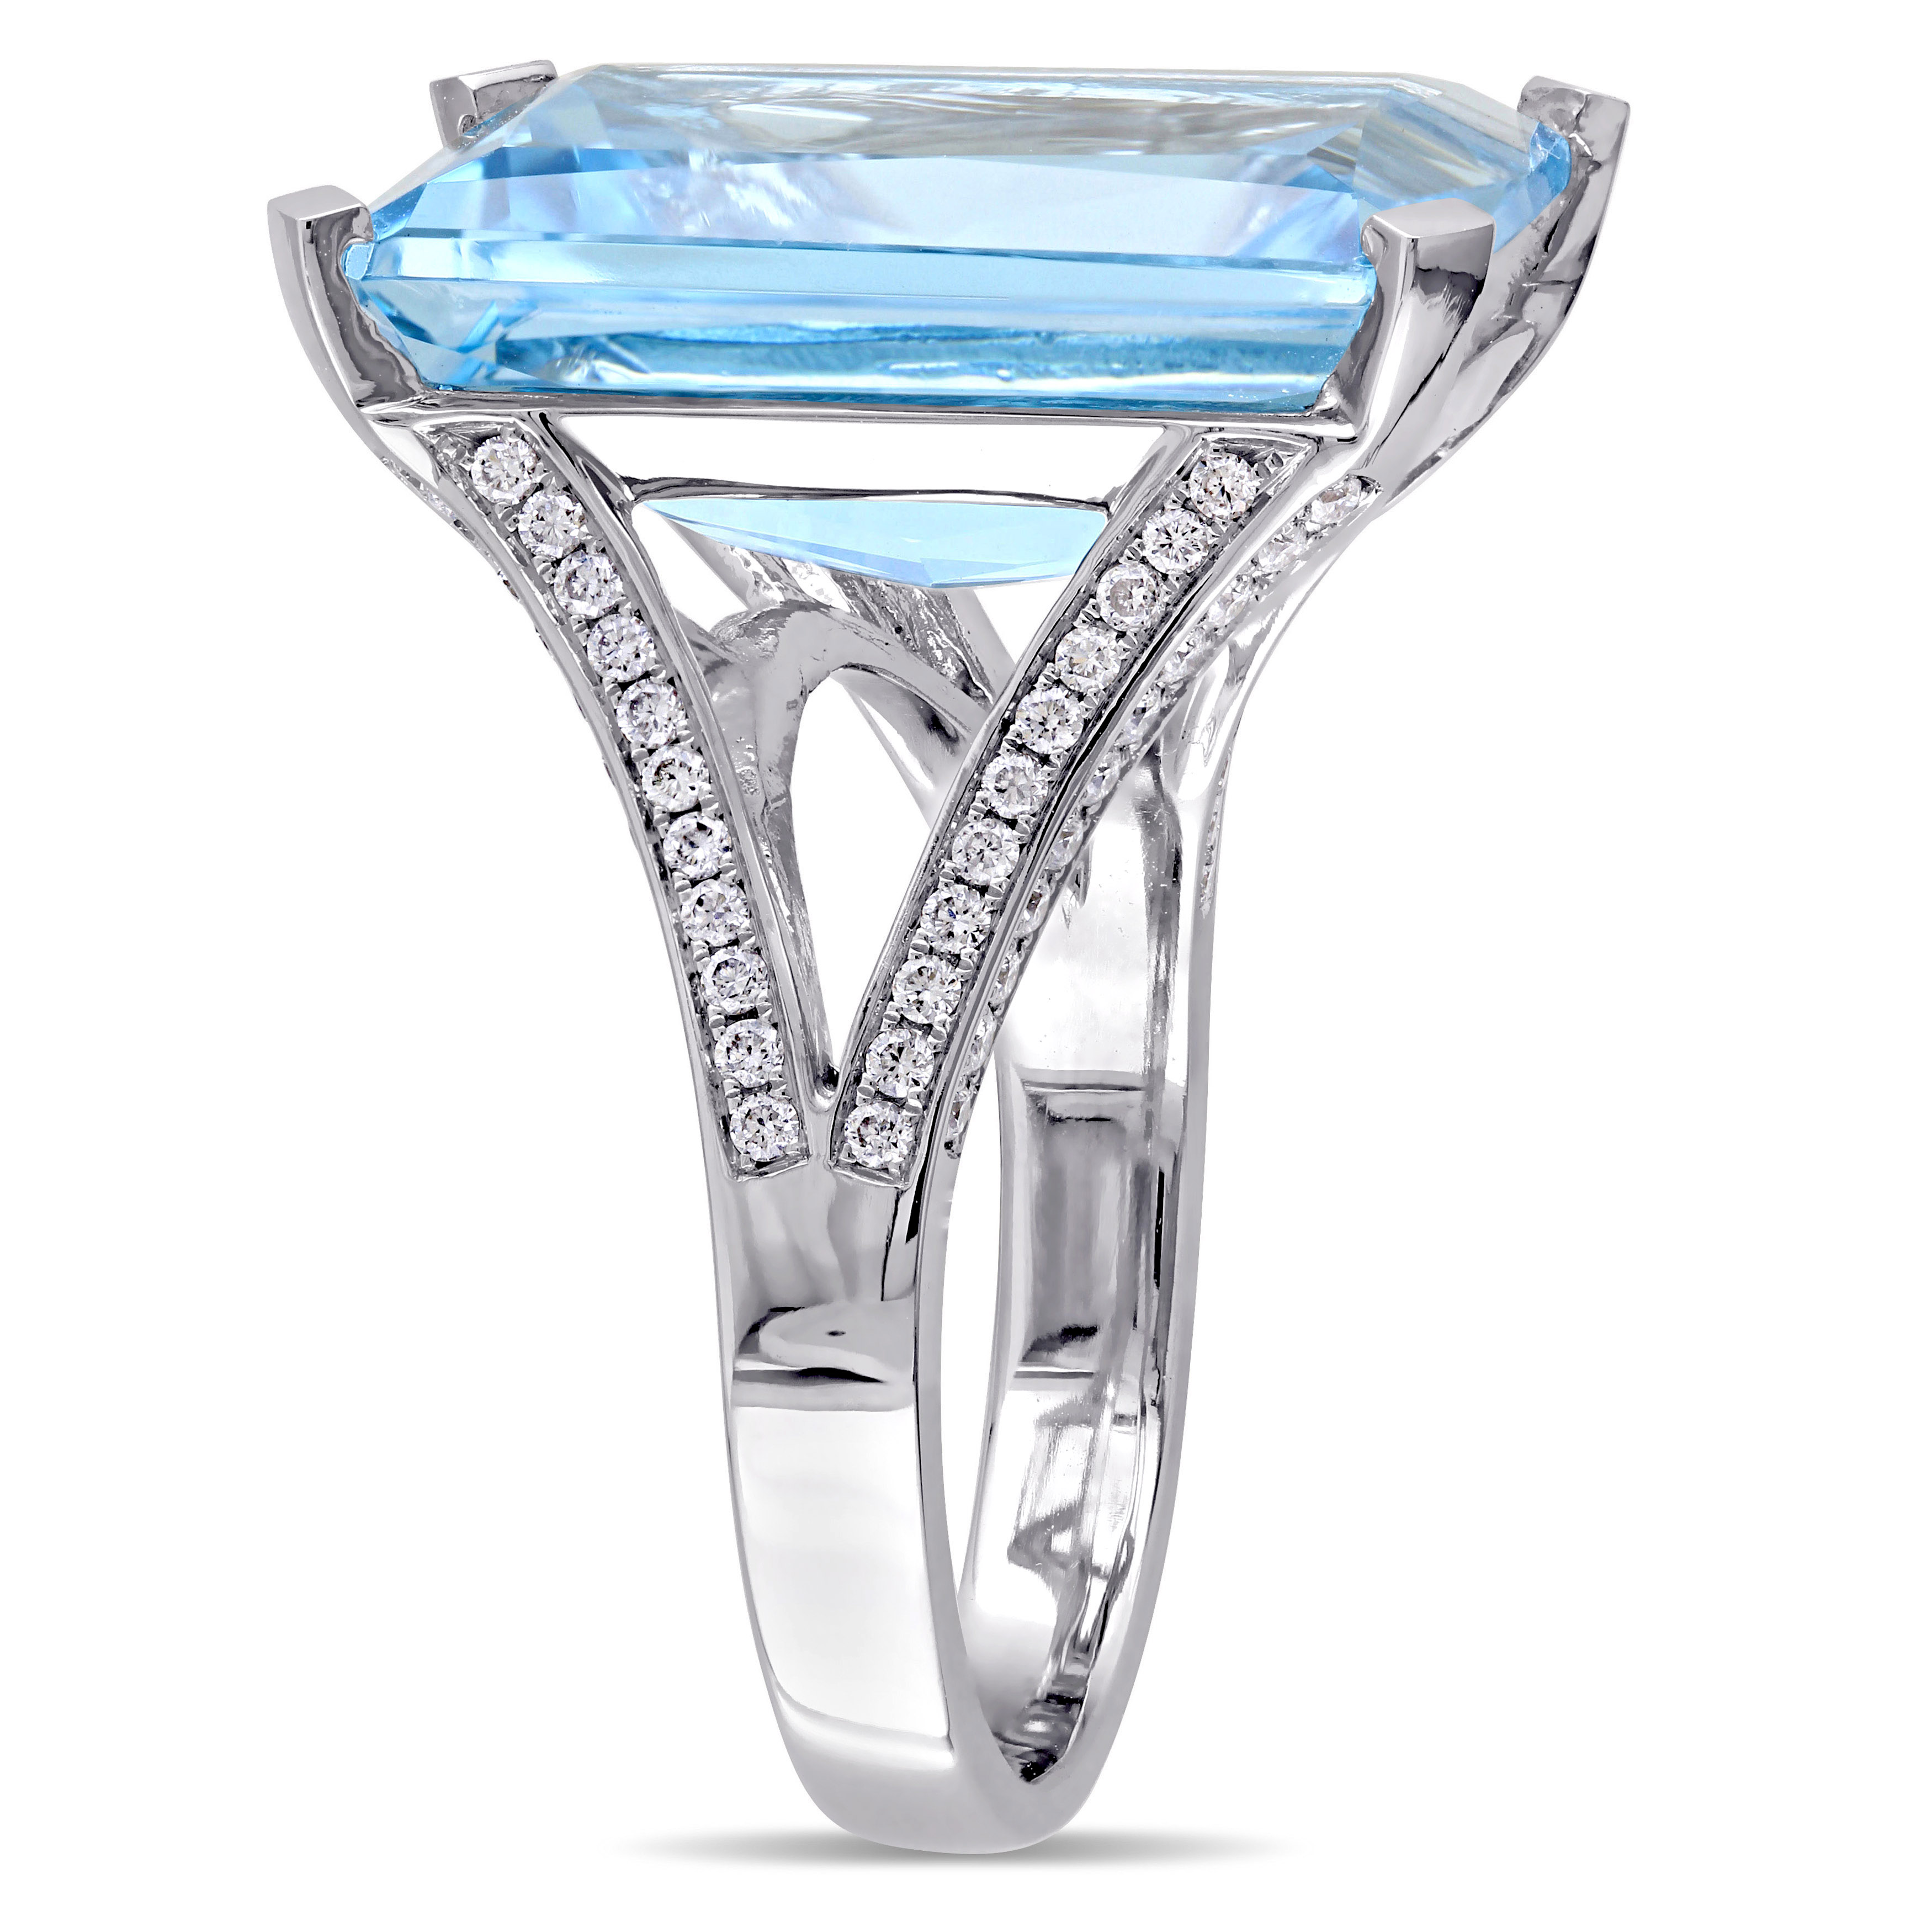 18 CT TGW Octagon-Cut Blue Topaz and 1/2 CT TW Diamond Ring in 14k White Gold